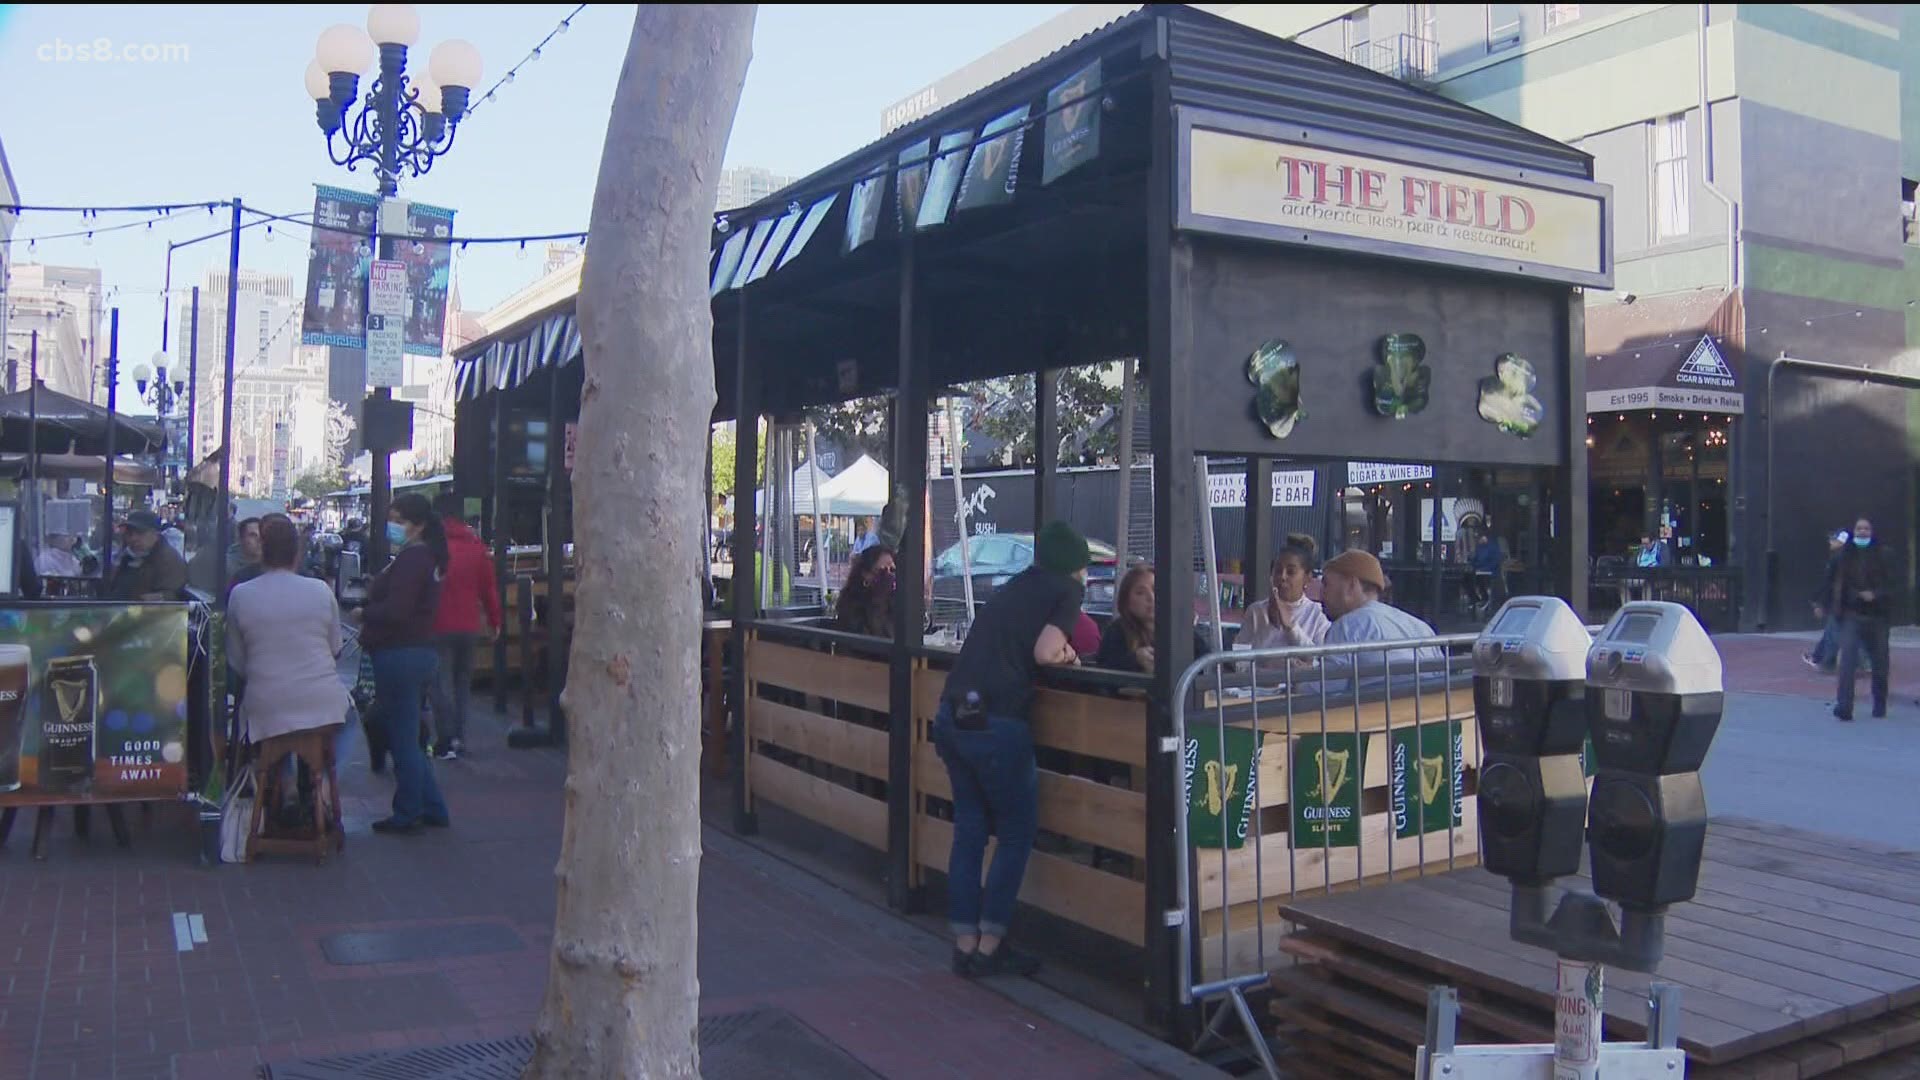 St. Patrick's Day won't be filled with normal celebrations but the Gaslamp is preparing for crowds for the Irish holiday.